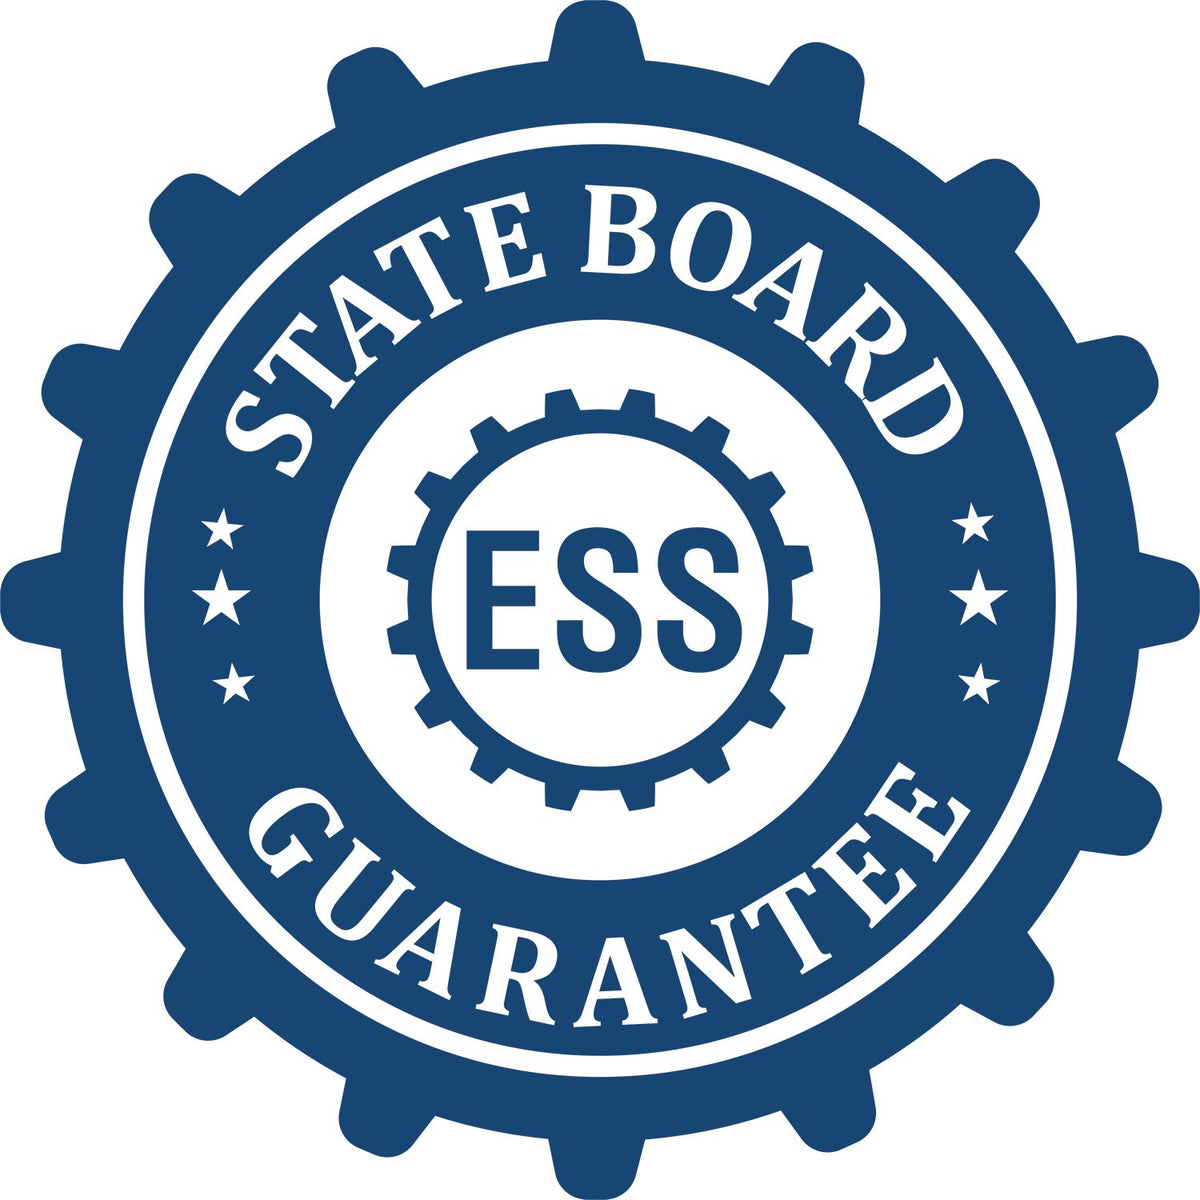 An emblem in a gear shape illustrating a state board guarantee for the Digital Florida PE Stamp and Electronic Seal for Florida Engineer product.